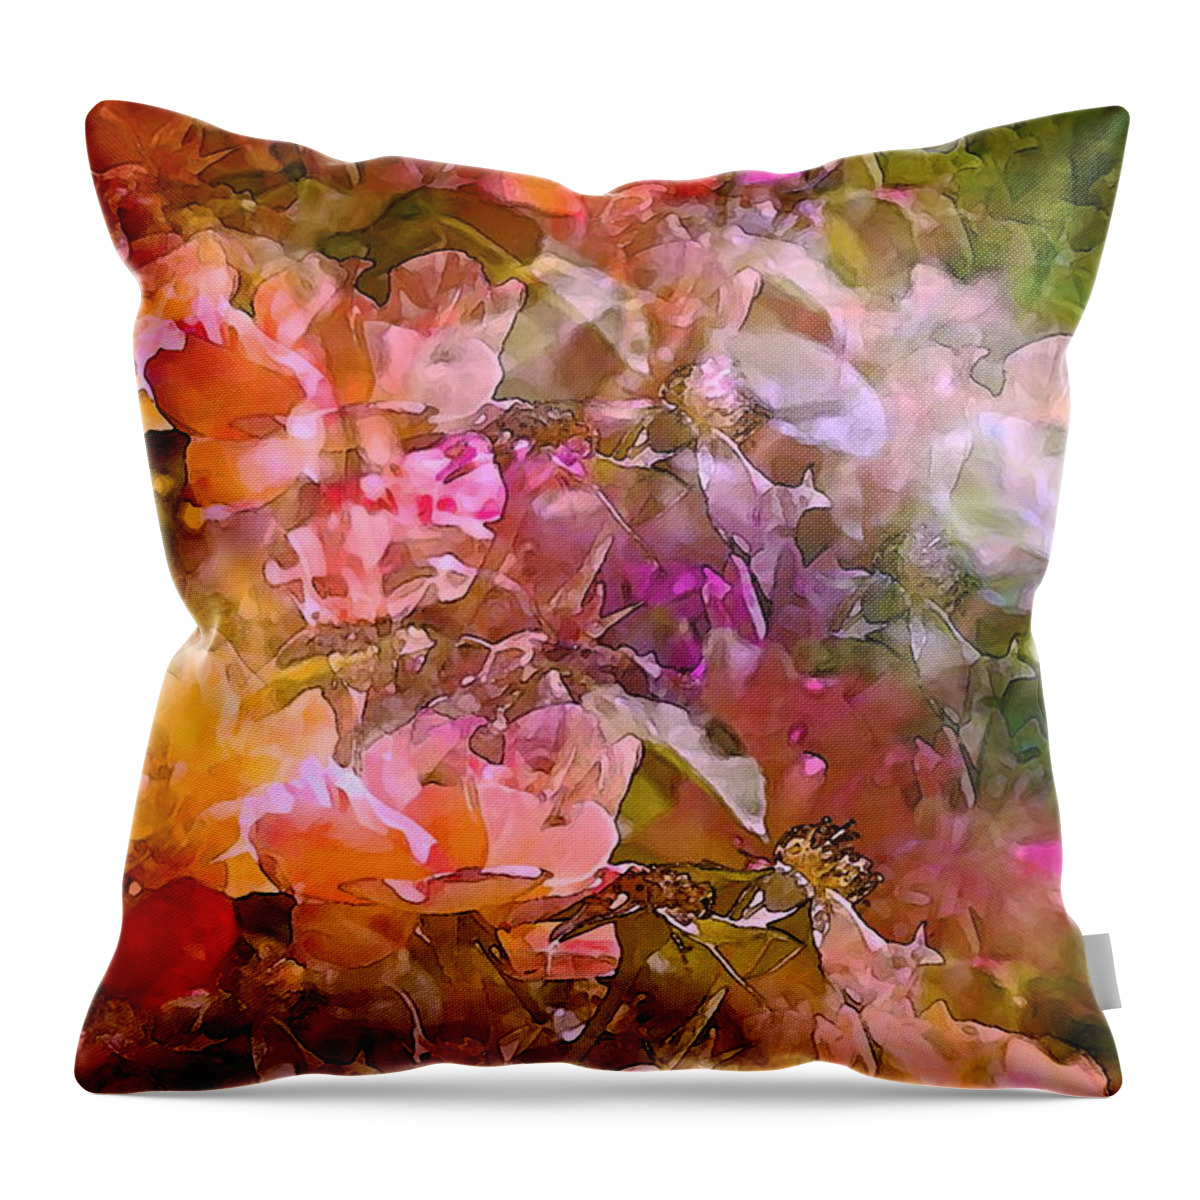 Abstract Throw Pillow featuring the photograph Abstract 276 by Pamela Cooper